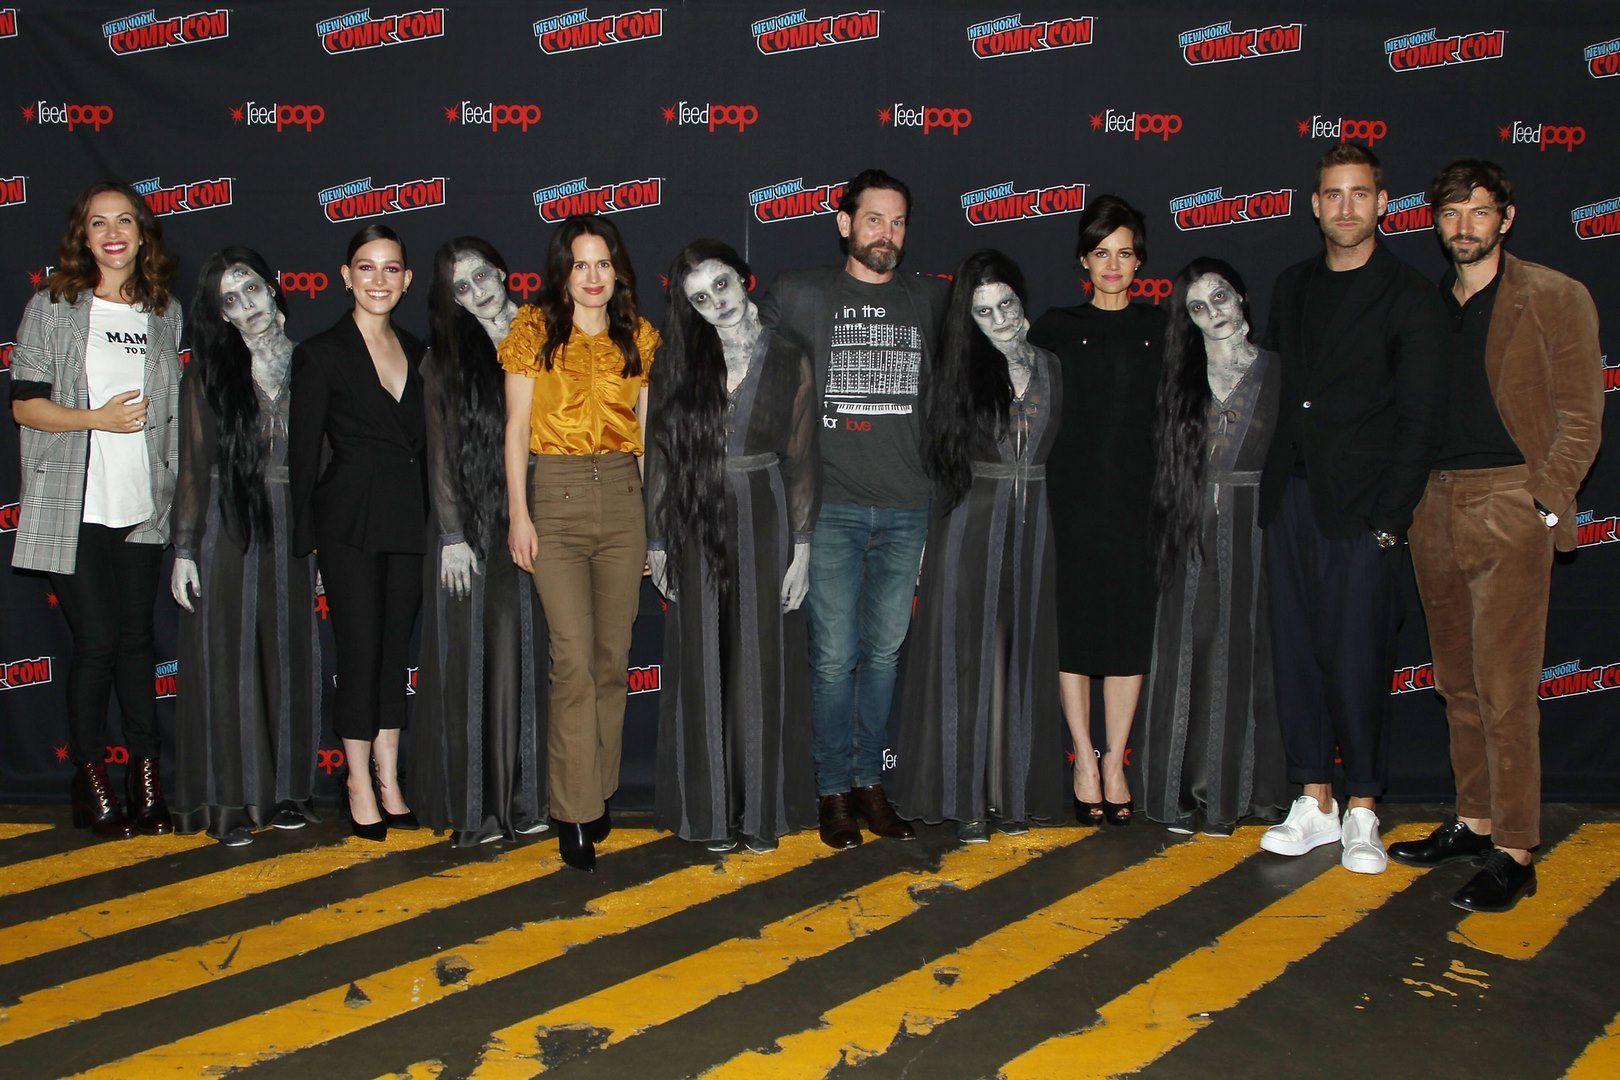 NYCC 2018: The Haunting of Hill House Photo Galley